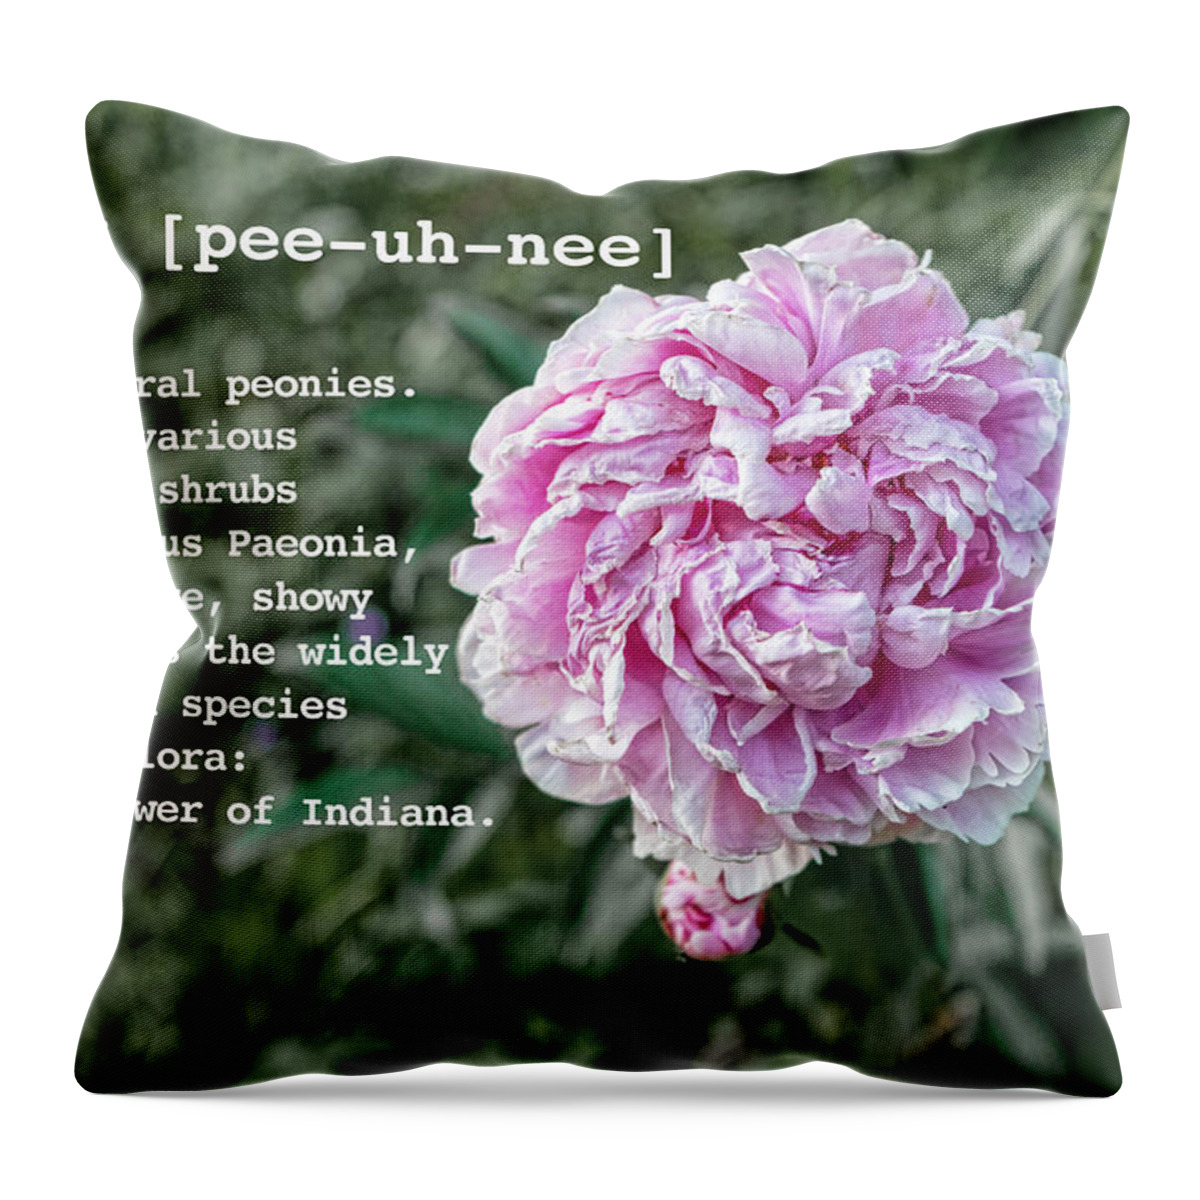 Peony By Definition Throw Pillow featuring the photograph Peony by Definition by Sharon Popek